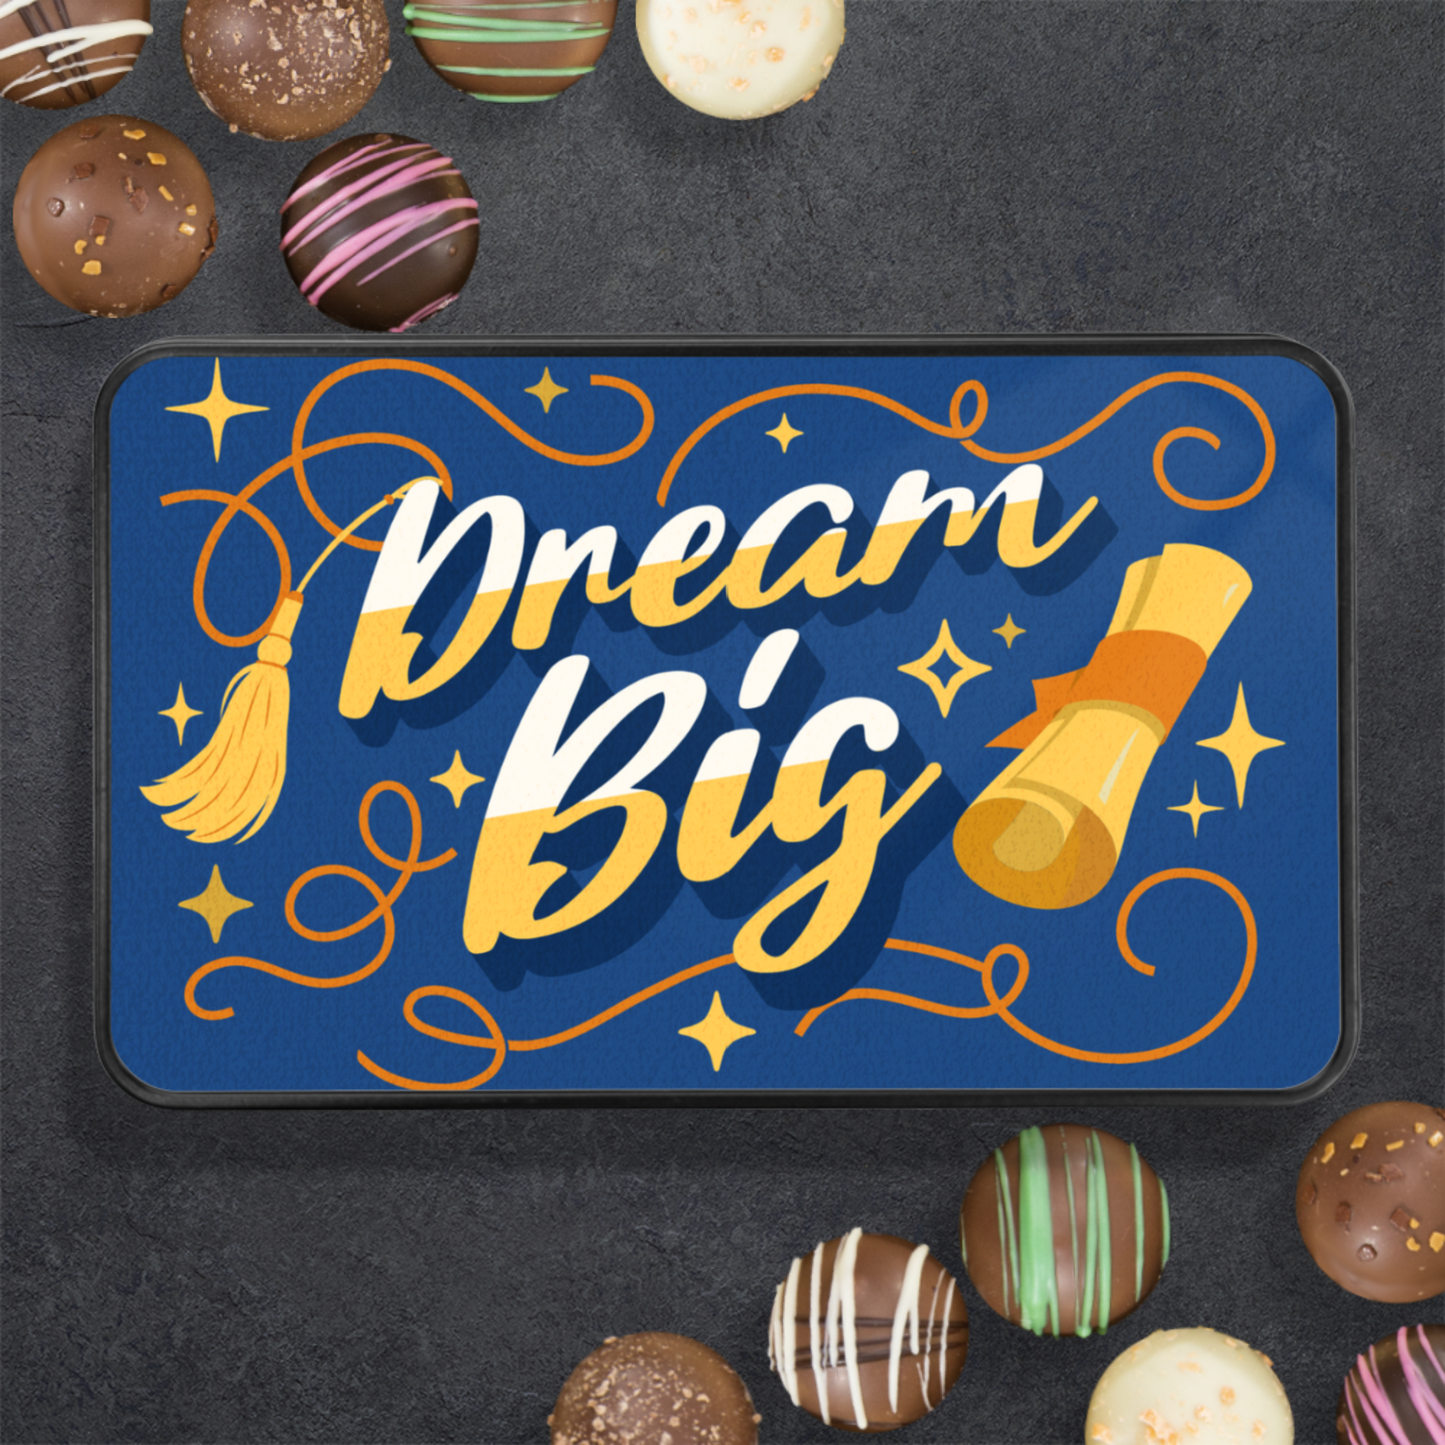 Dream Big Truffle Box - Blue Background with Diploma Graphic - 12 Decadent Assorted Flavors